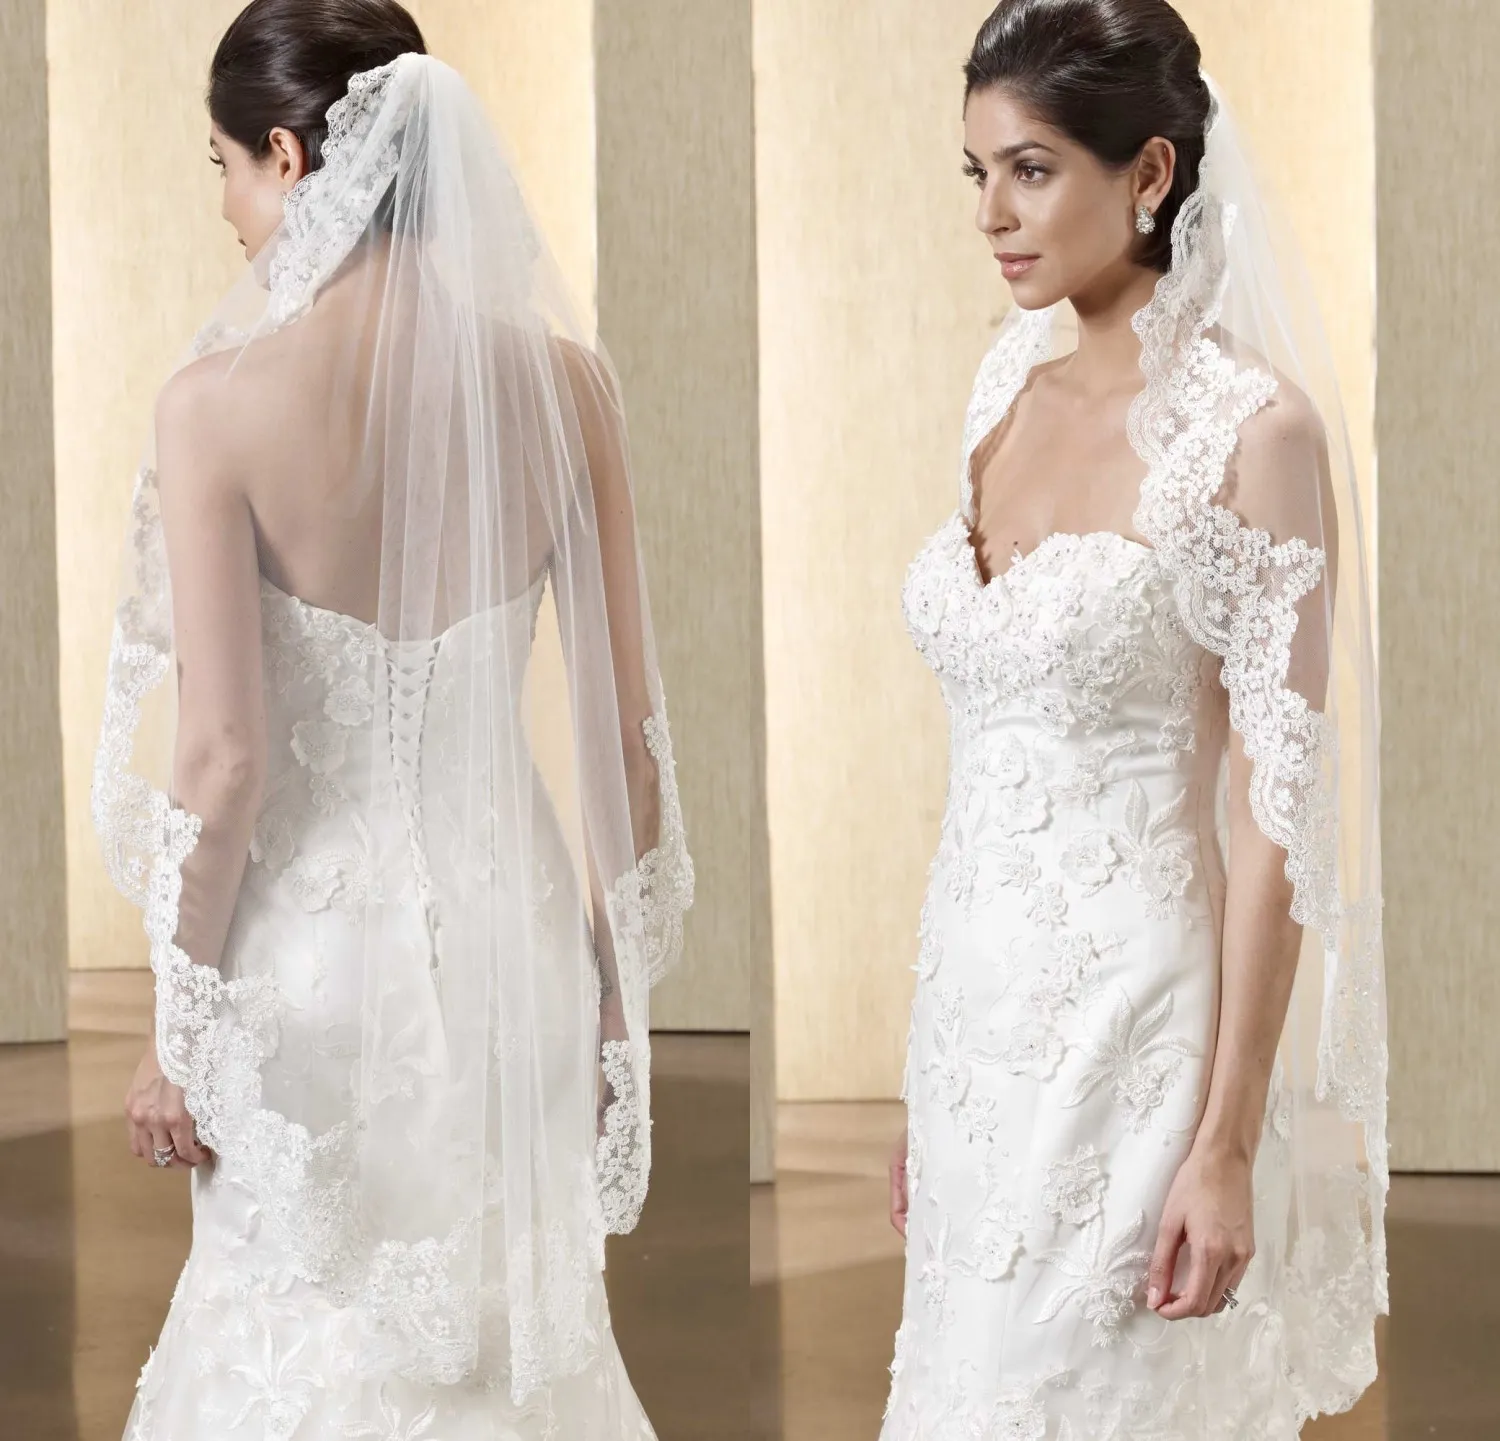 Hot Sell Bridal Veils 2015 From Eiffelbride With Embellished Lace ...